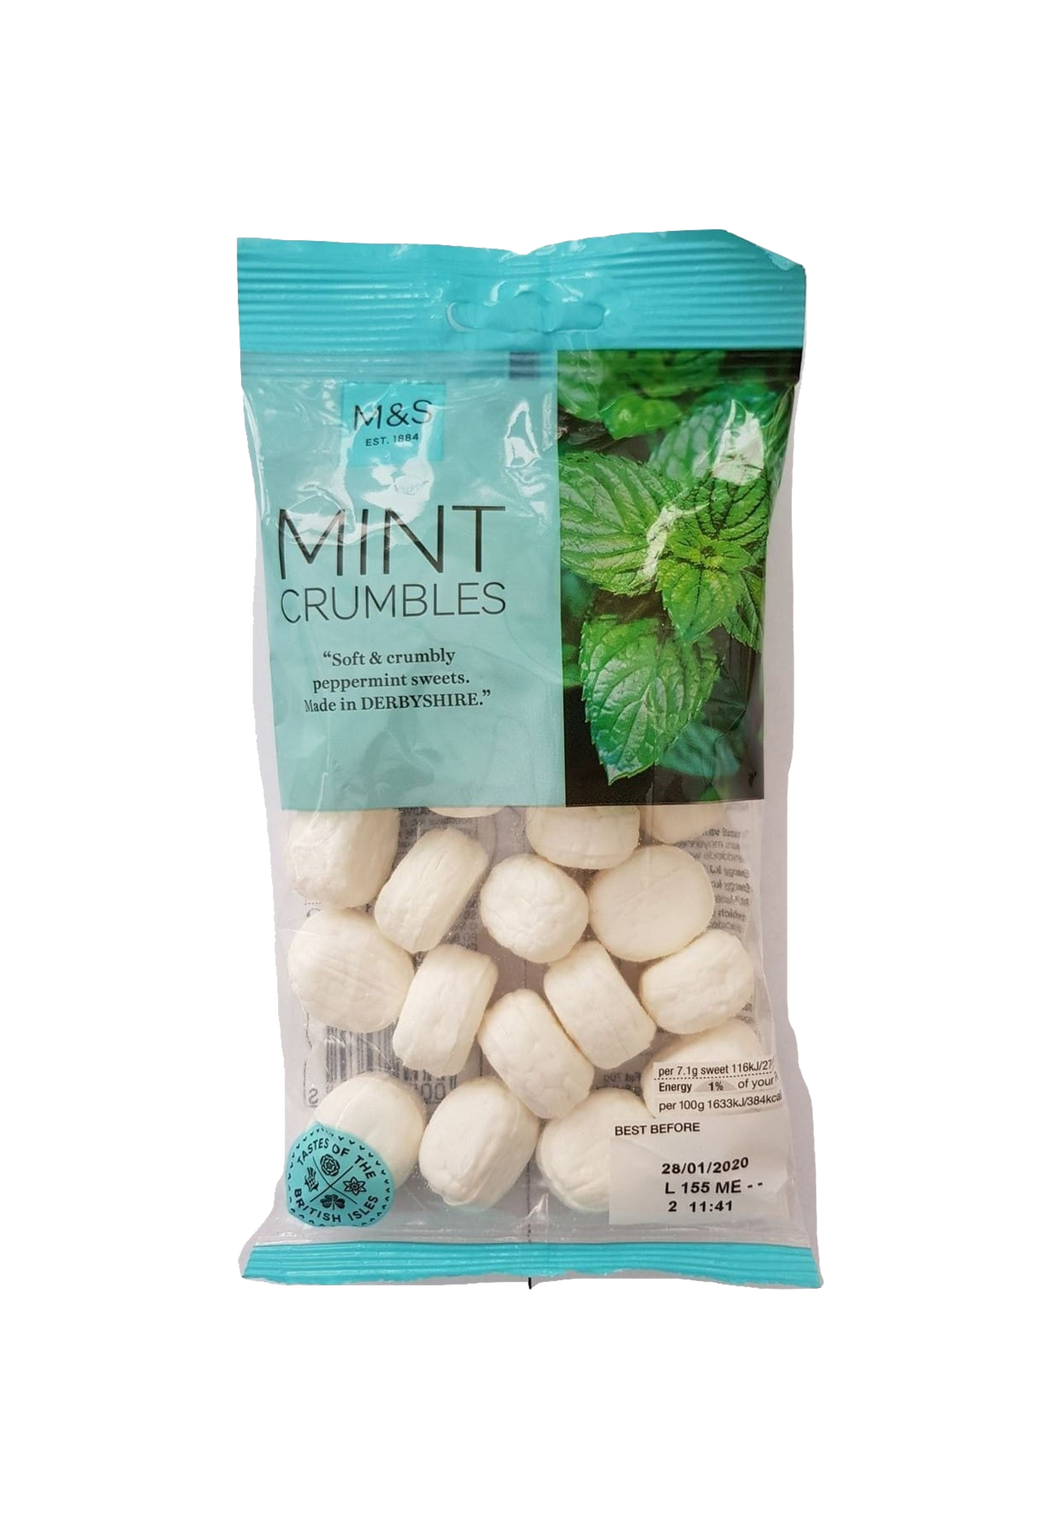 M&S Food Mint Crumbles Candy 178g